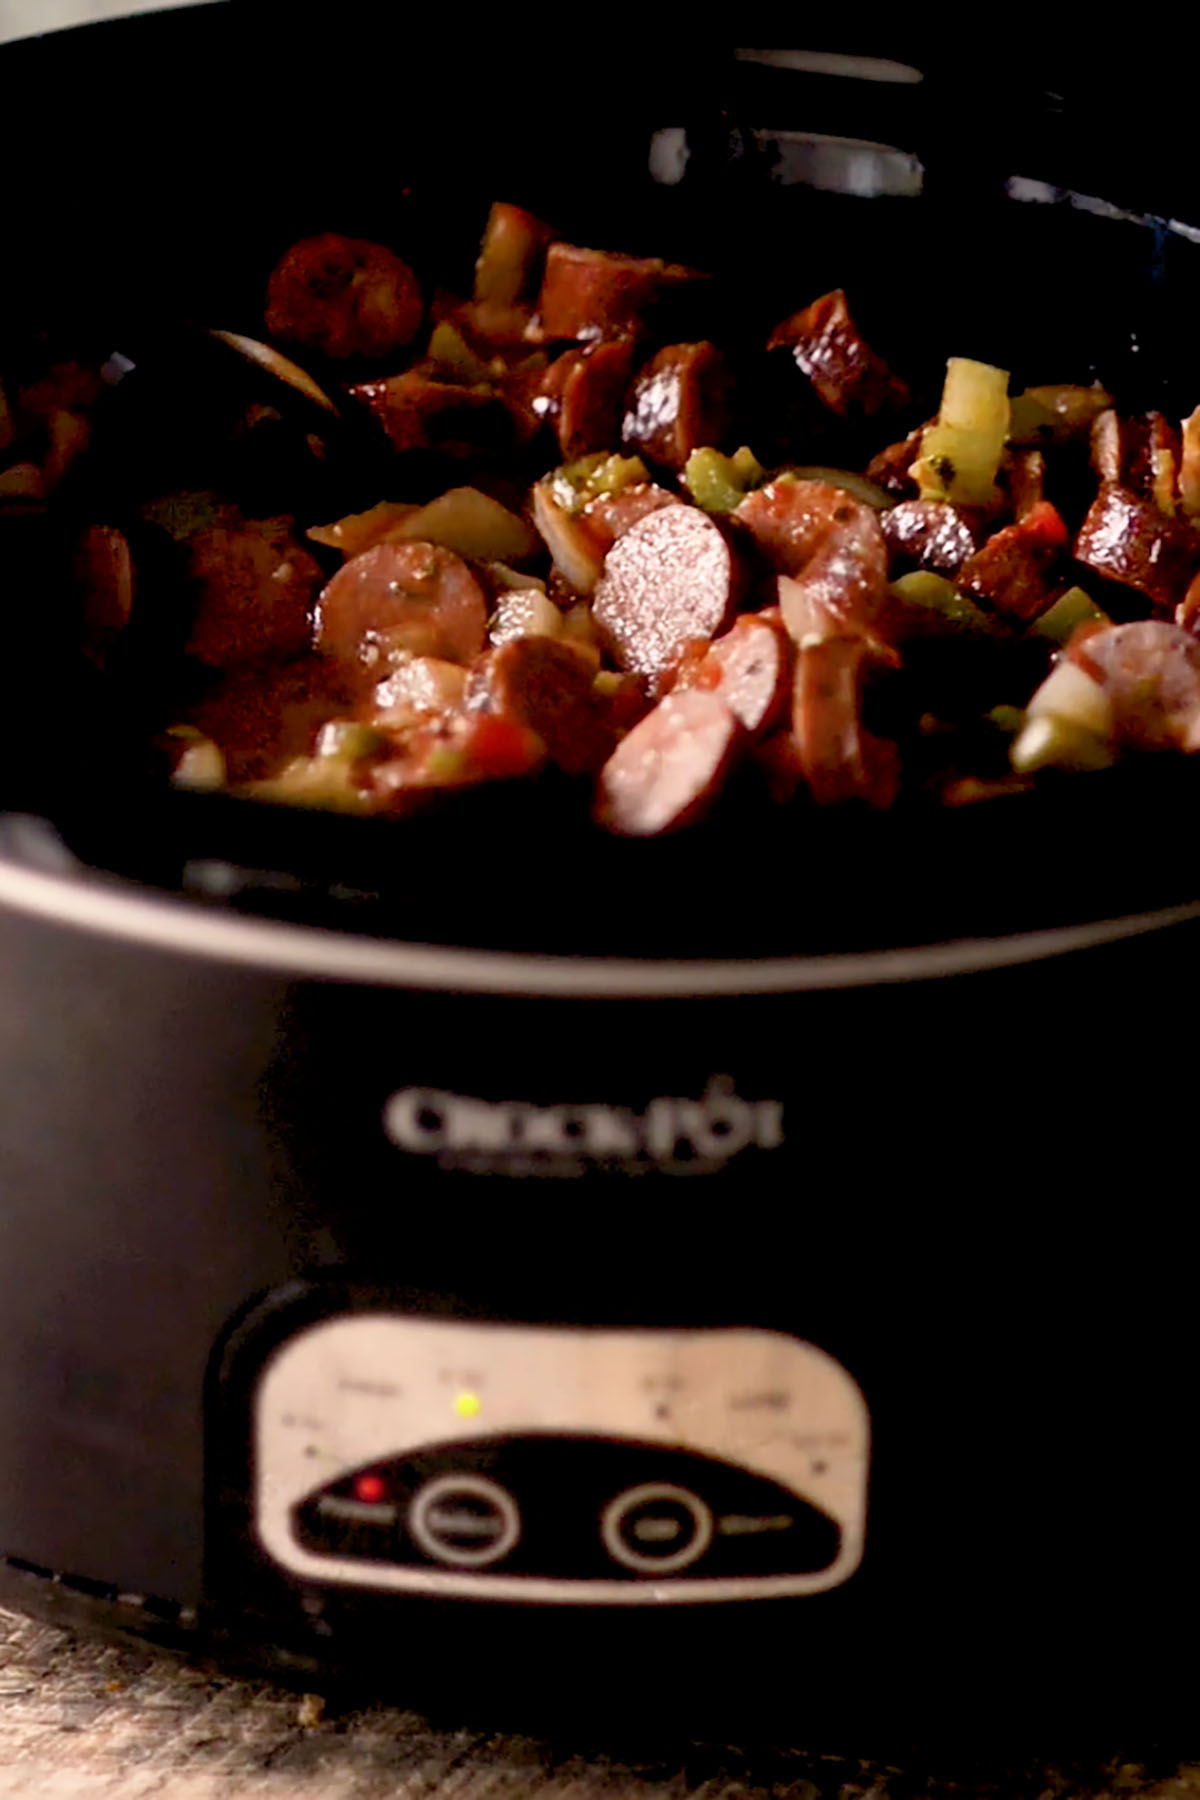 A crock pot full of sliced smoked sausage, chicken breasts, diced vegetables, and tomato sauce.